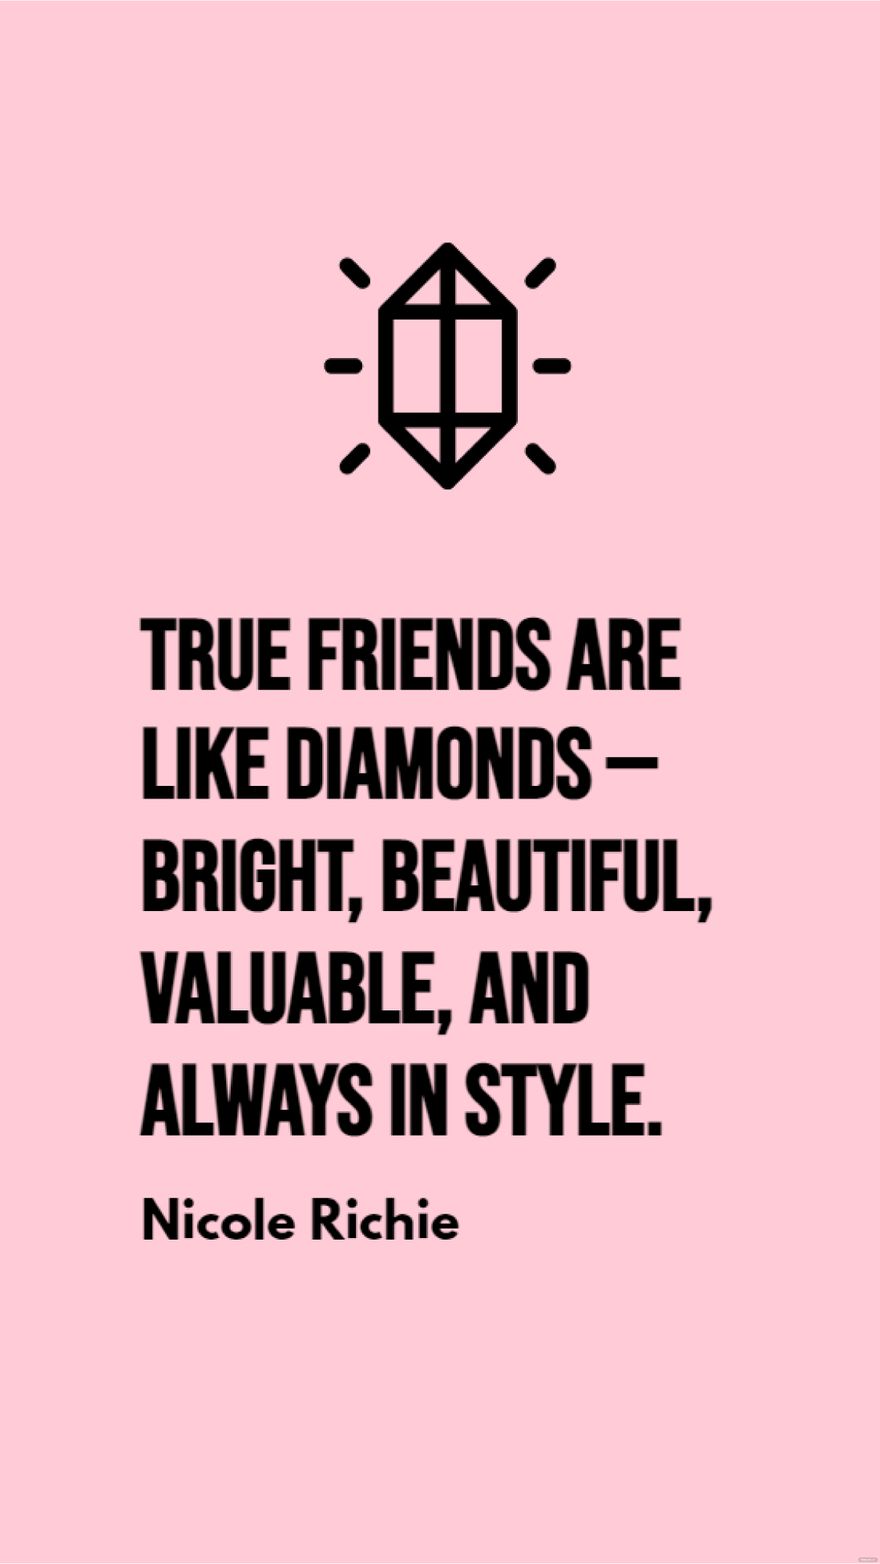 Free Nicole Richie - True friends are like diamonds — bright, beautiful, valuable, and always in style.